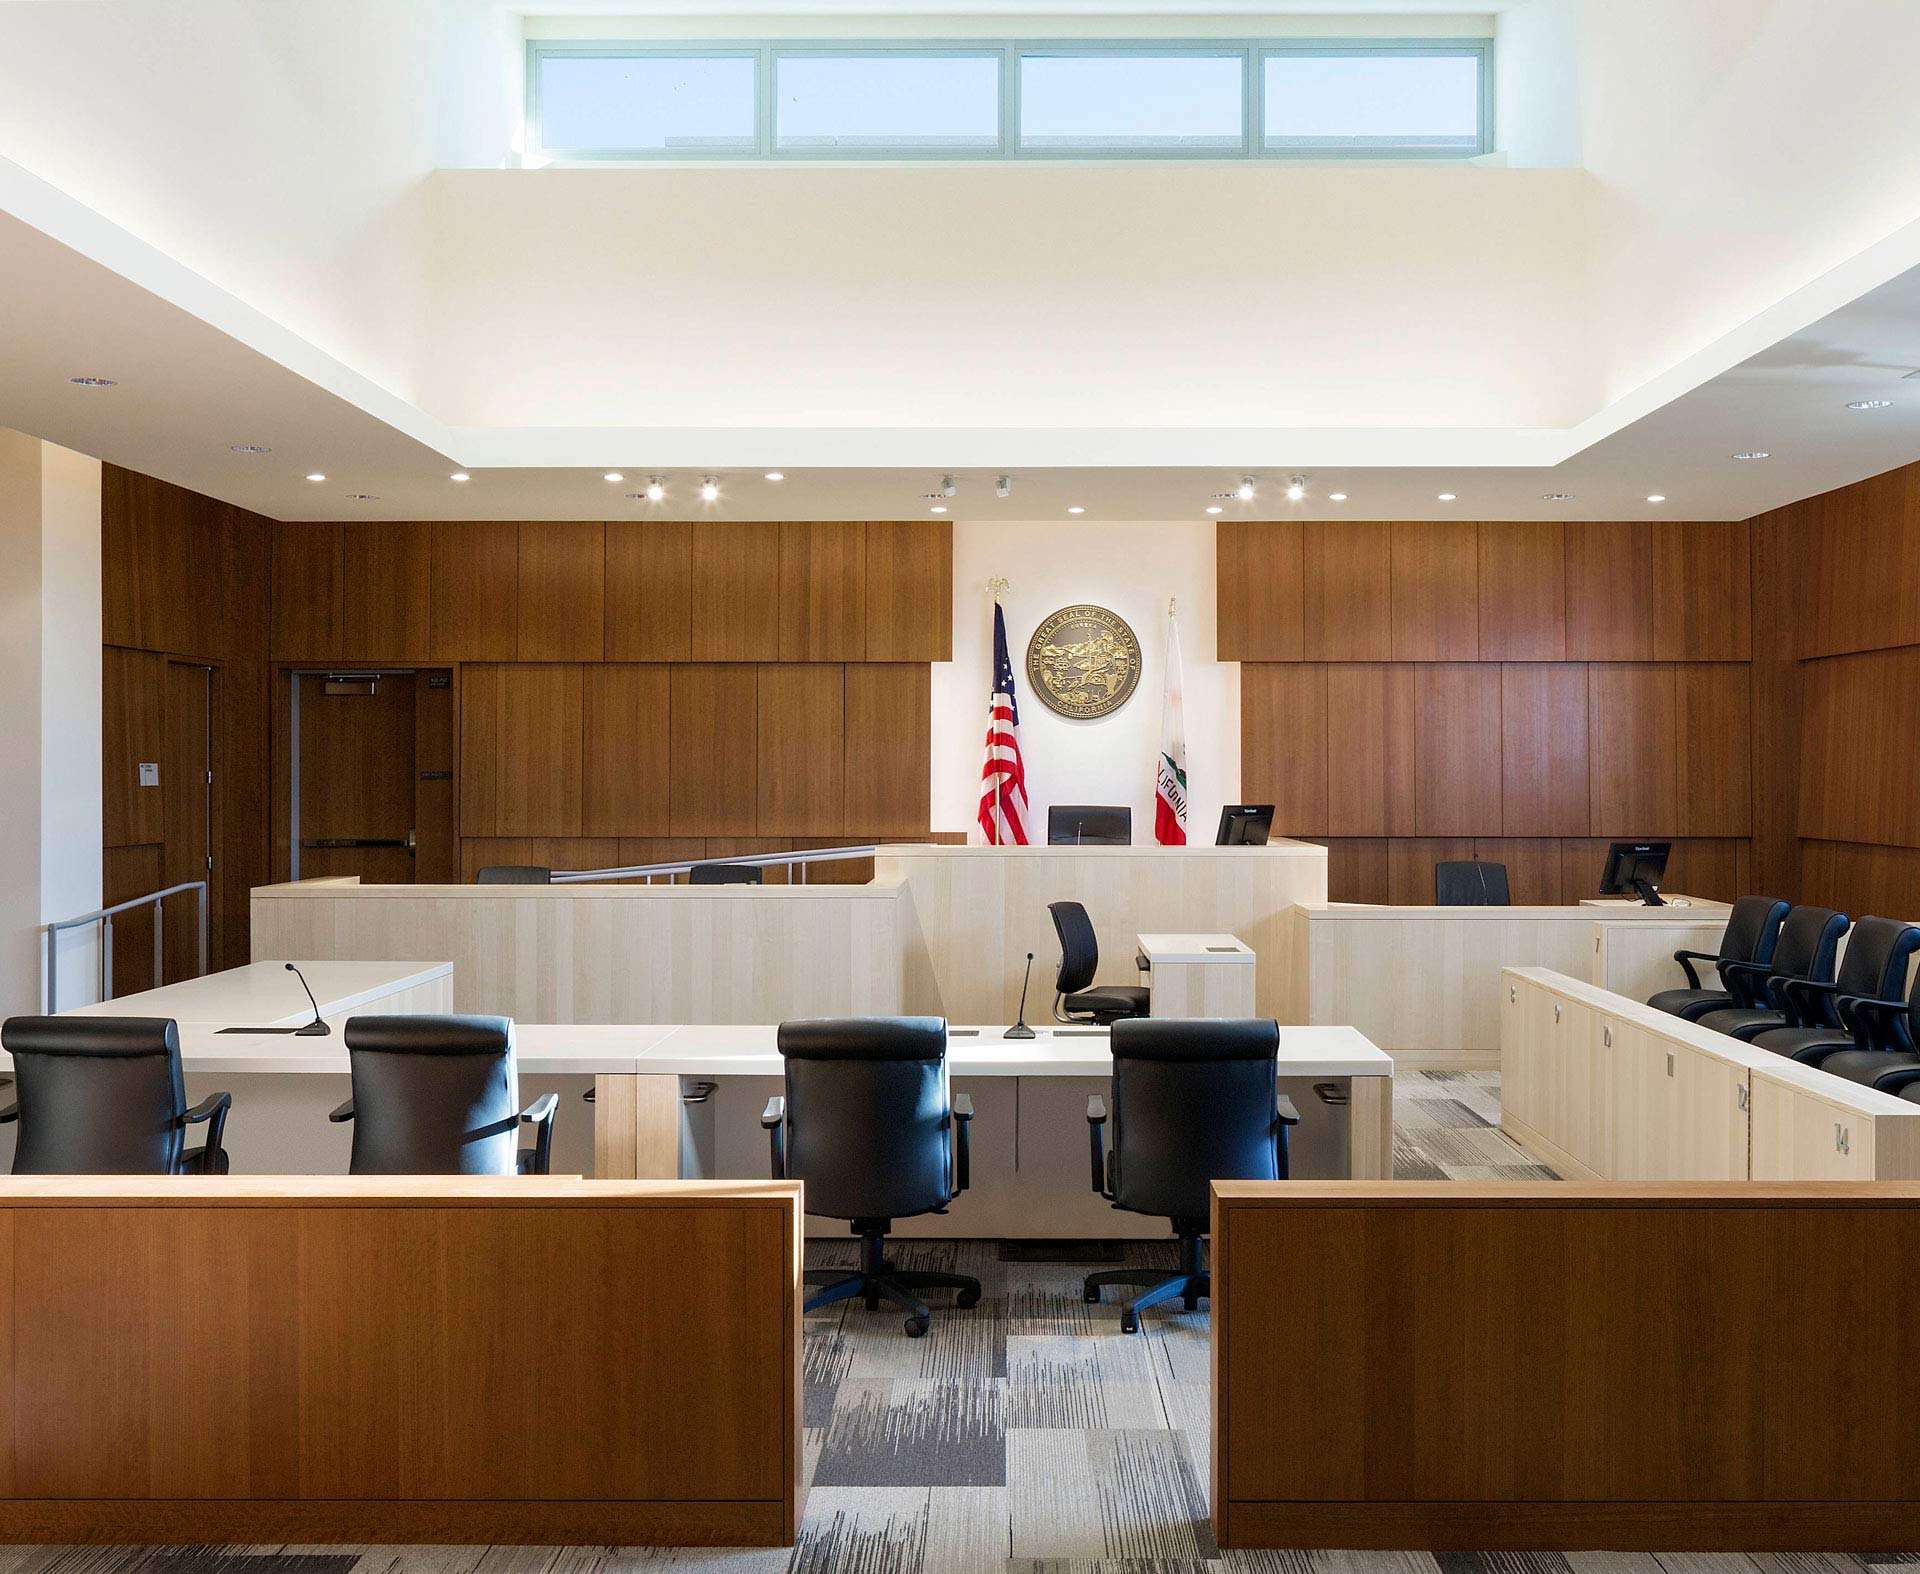 New Madera Courthouse